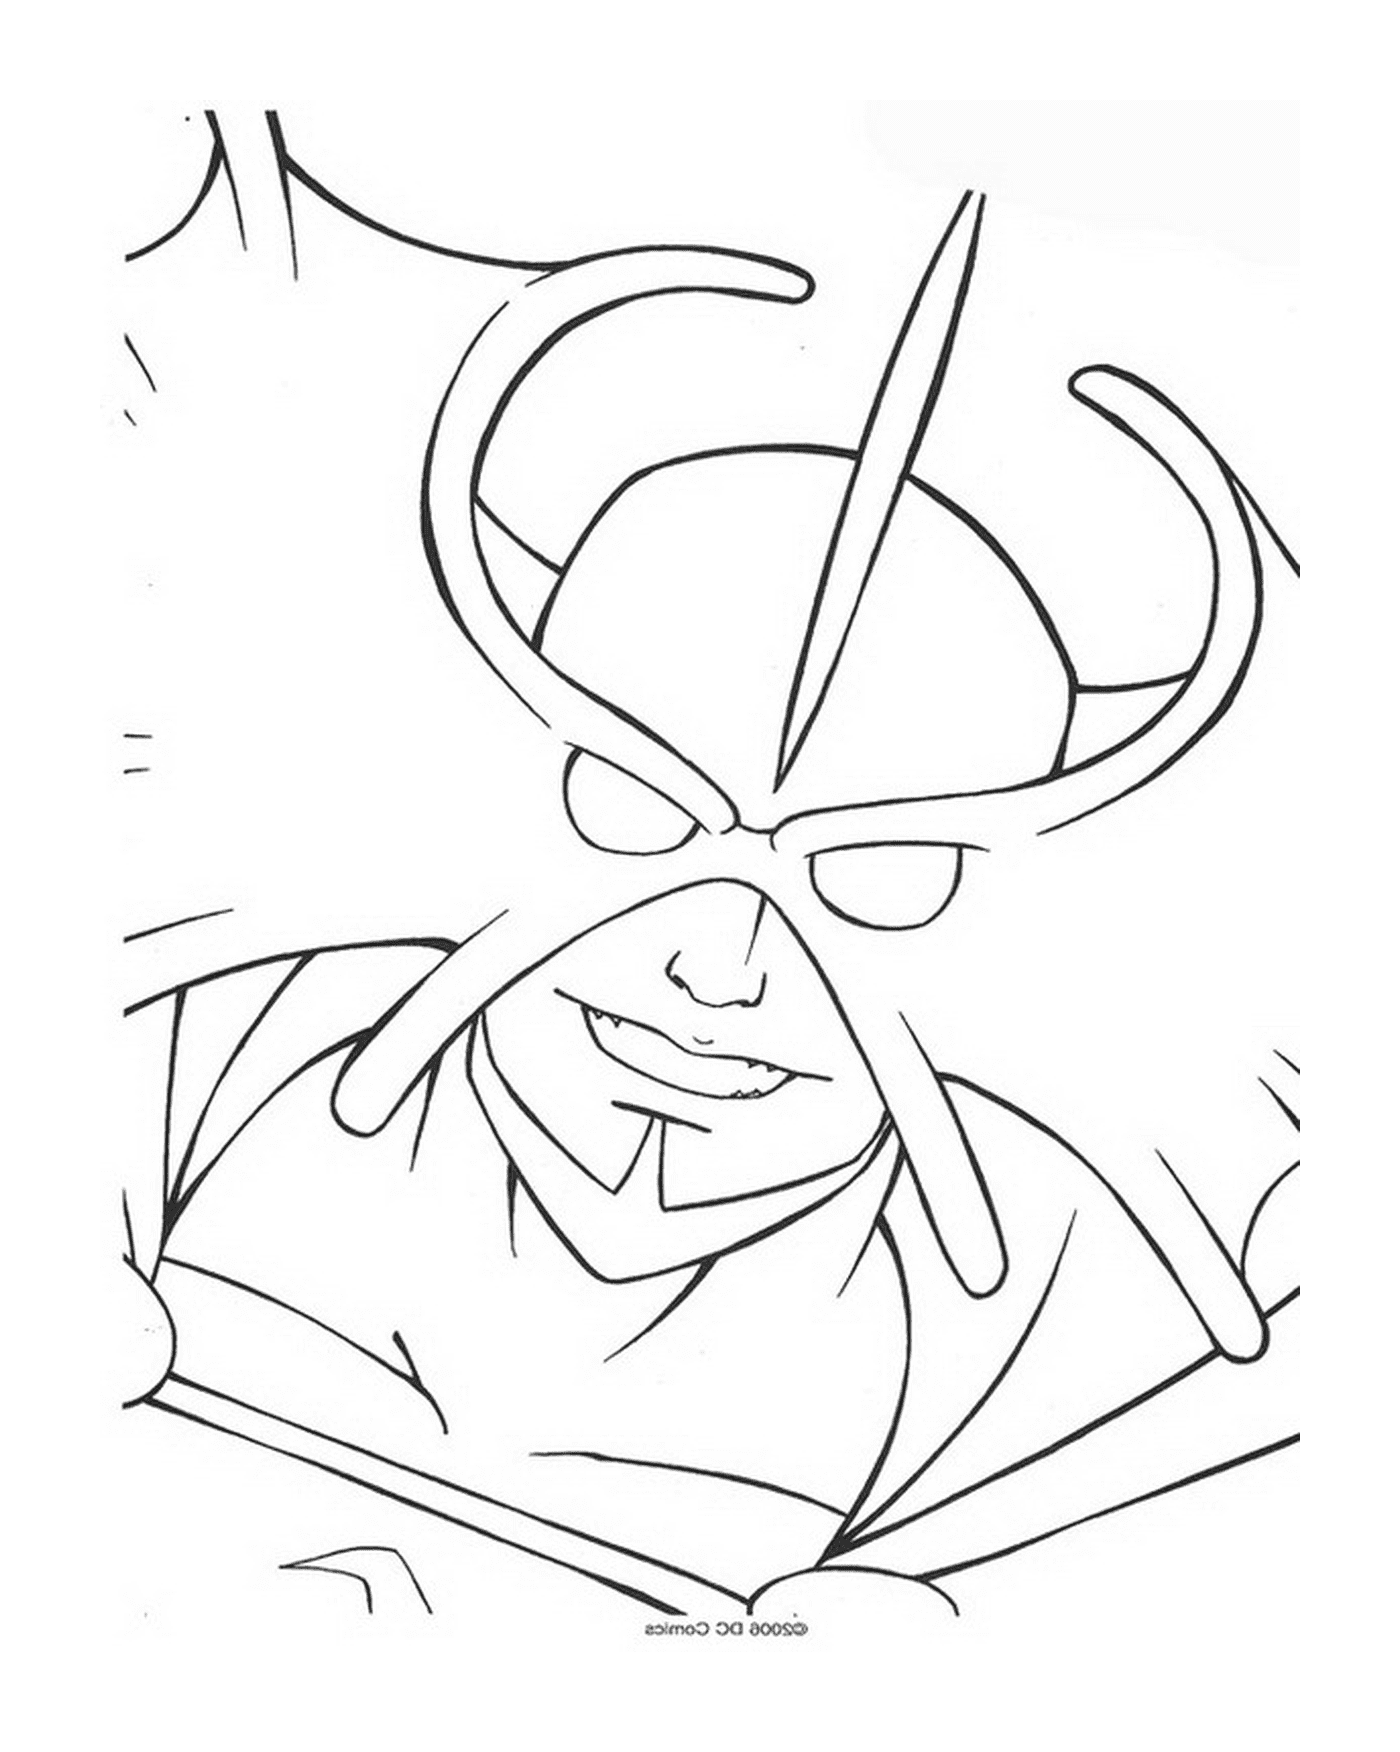  A man with horns 